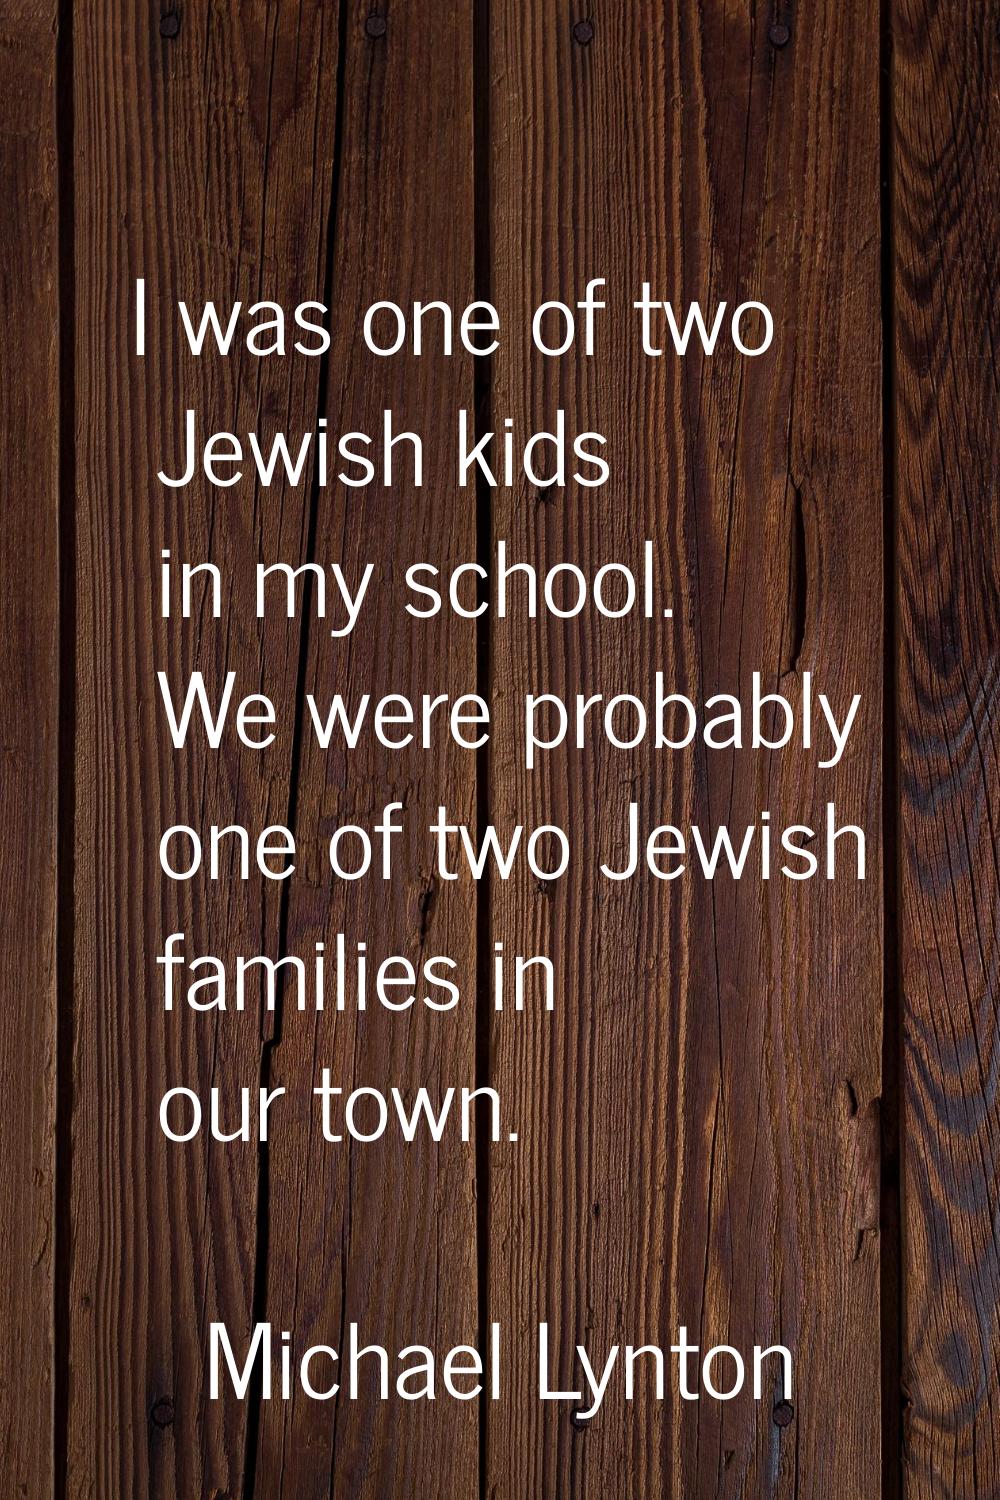 I was one of two Jewish kids in my school. We were probably one of two Jewish families in our town.